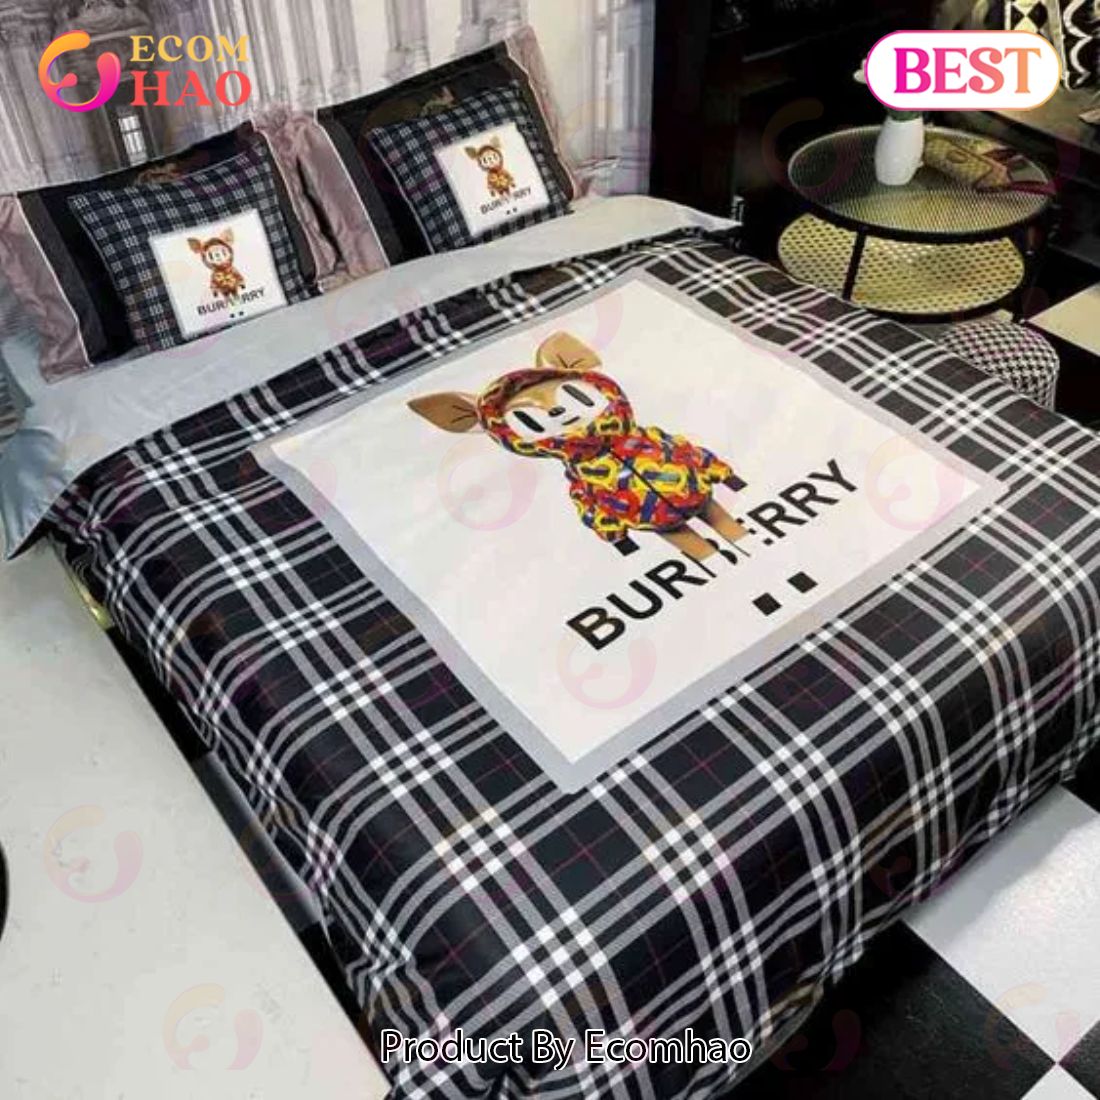 Burberry Caro Luxury Brand Bedding Set For Bedroom Luxury Bedspread Duvet Cover Set With Pillowcases Home Decoration